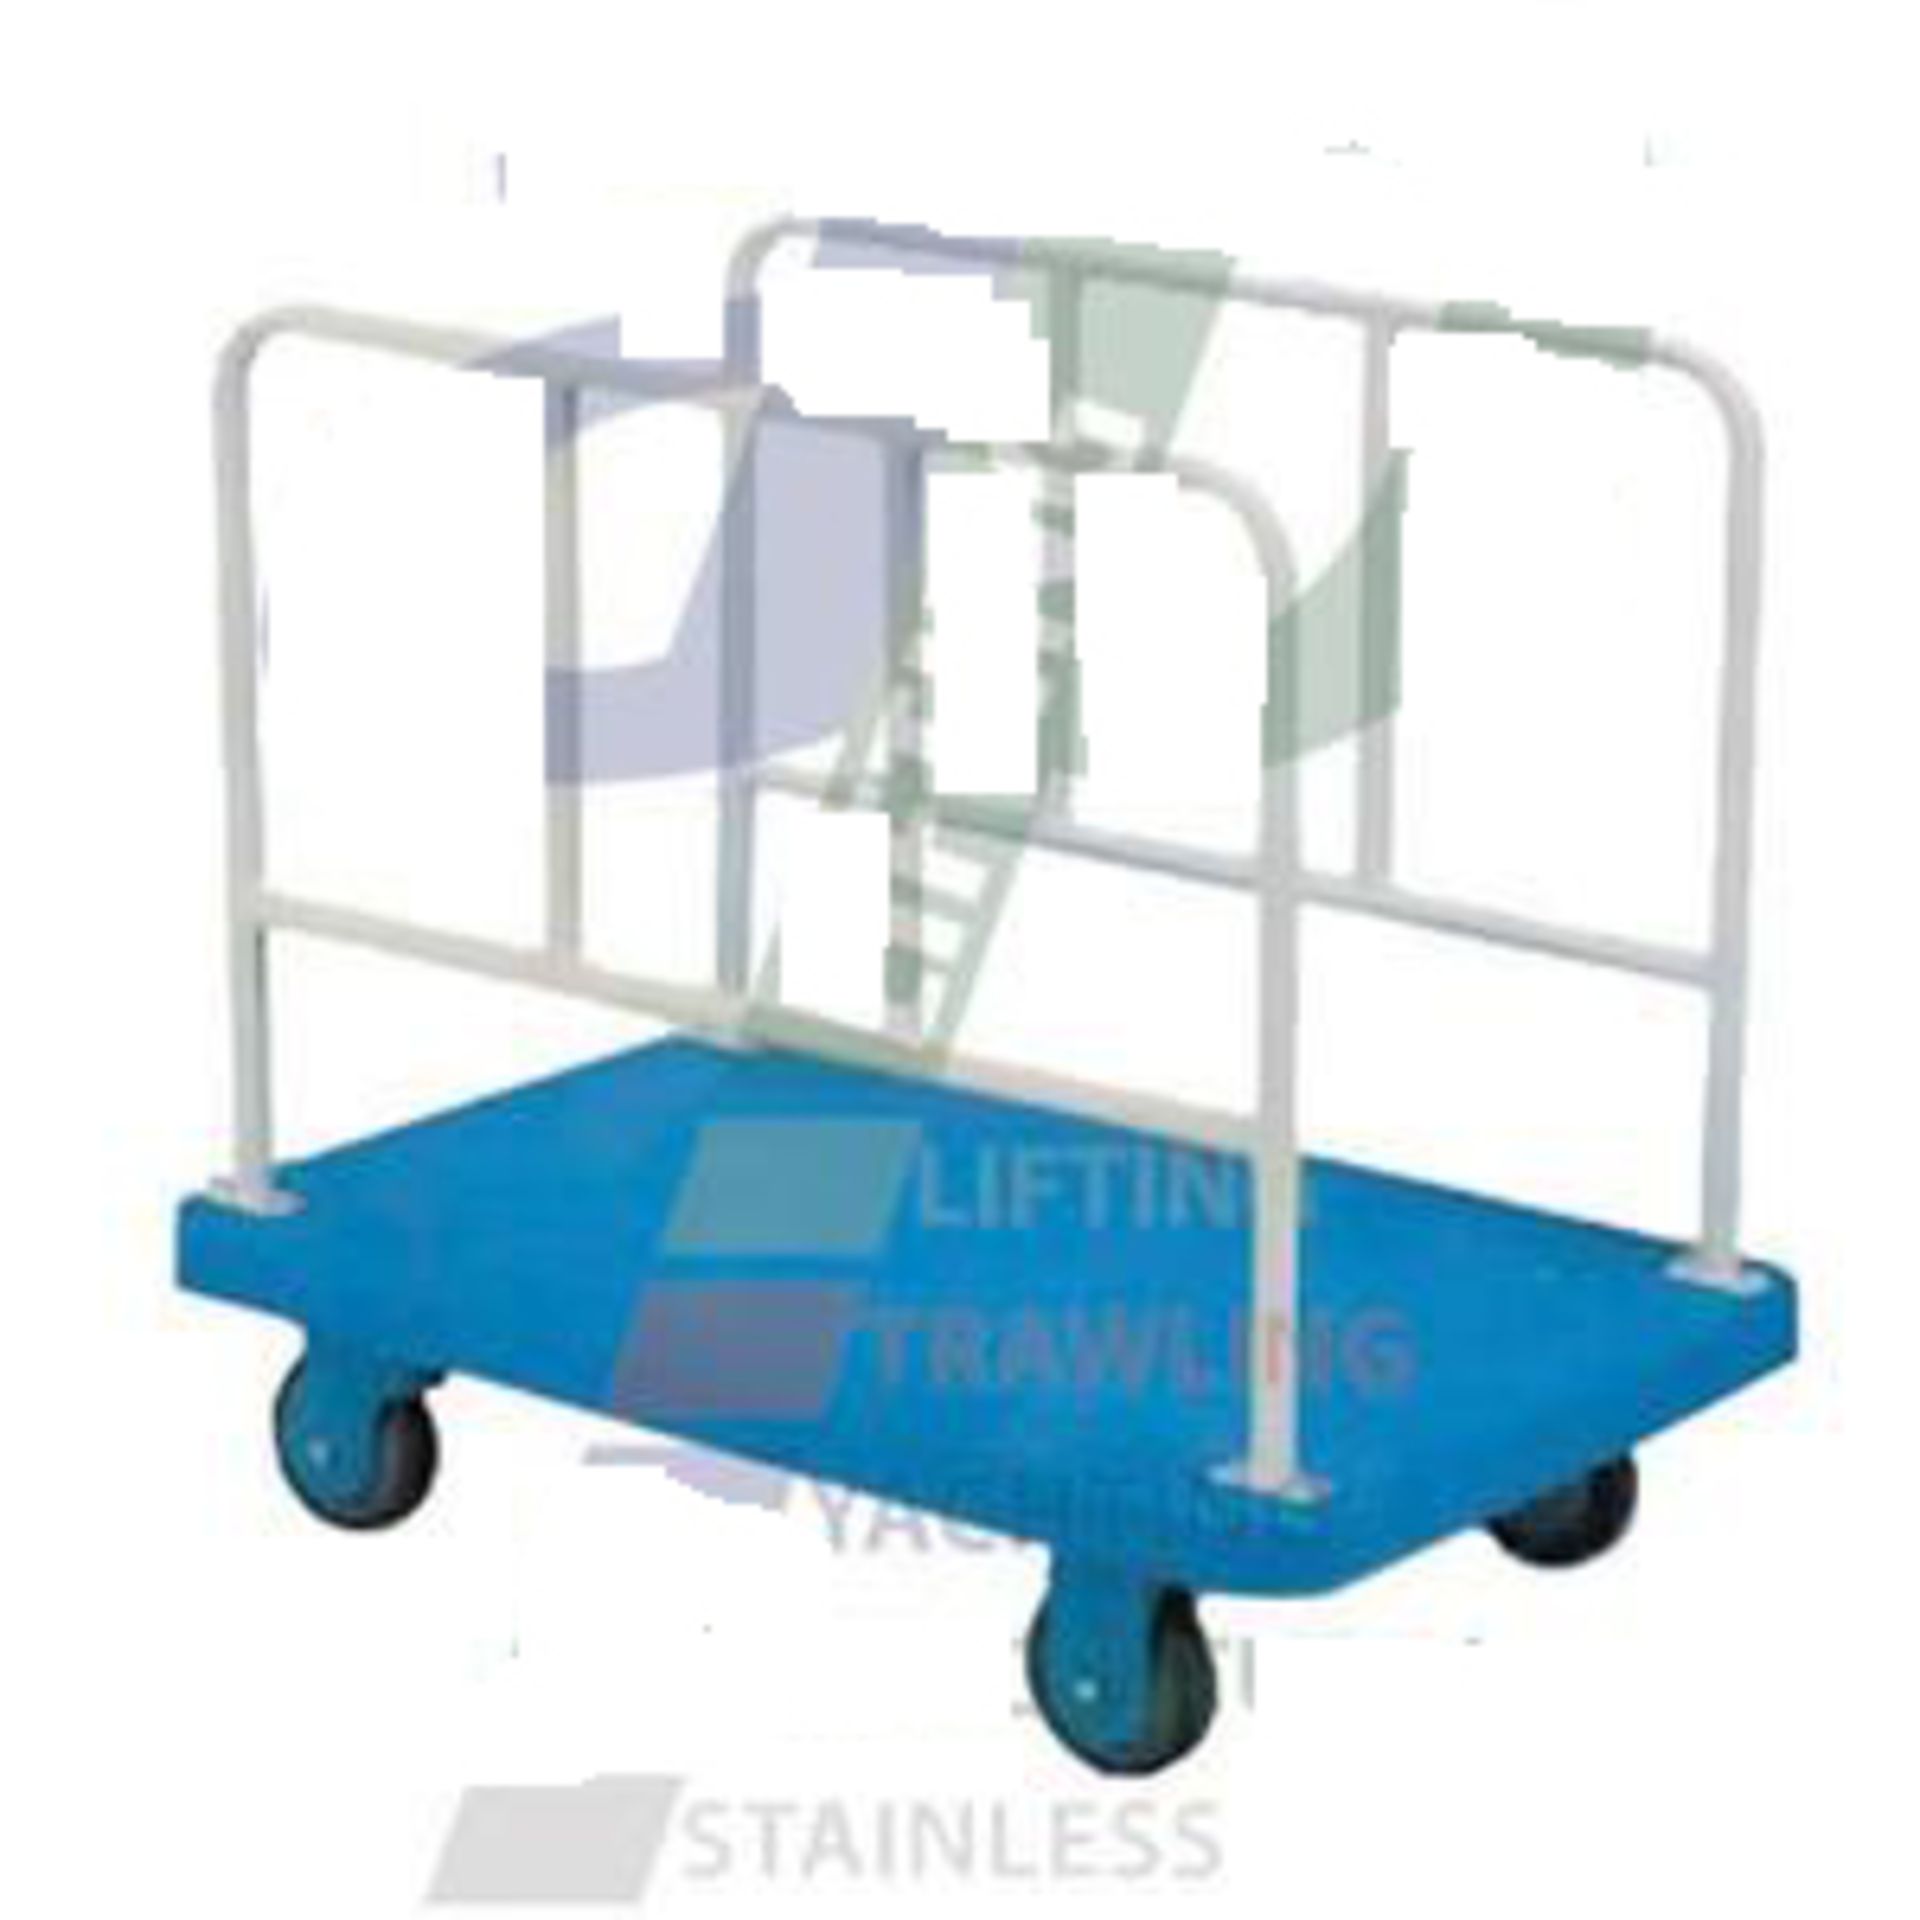 1 X 300KG PLATFORM TROLLEY (PZS250) - BRAND NEW
Built for long service.
 Ideal for office, school,